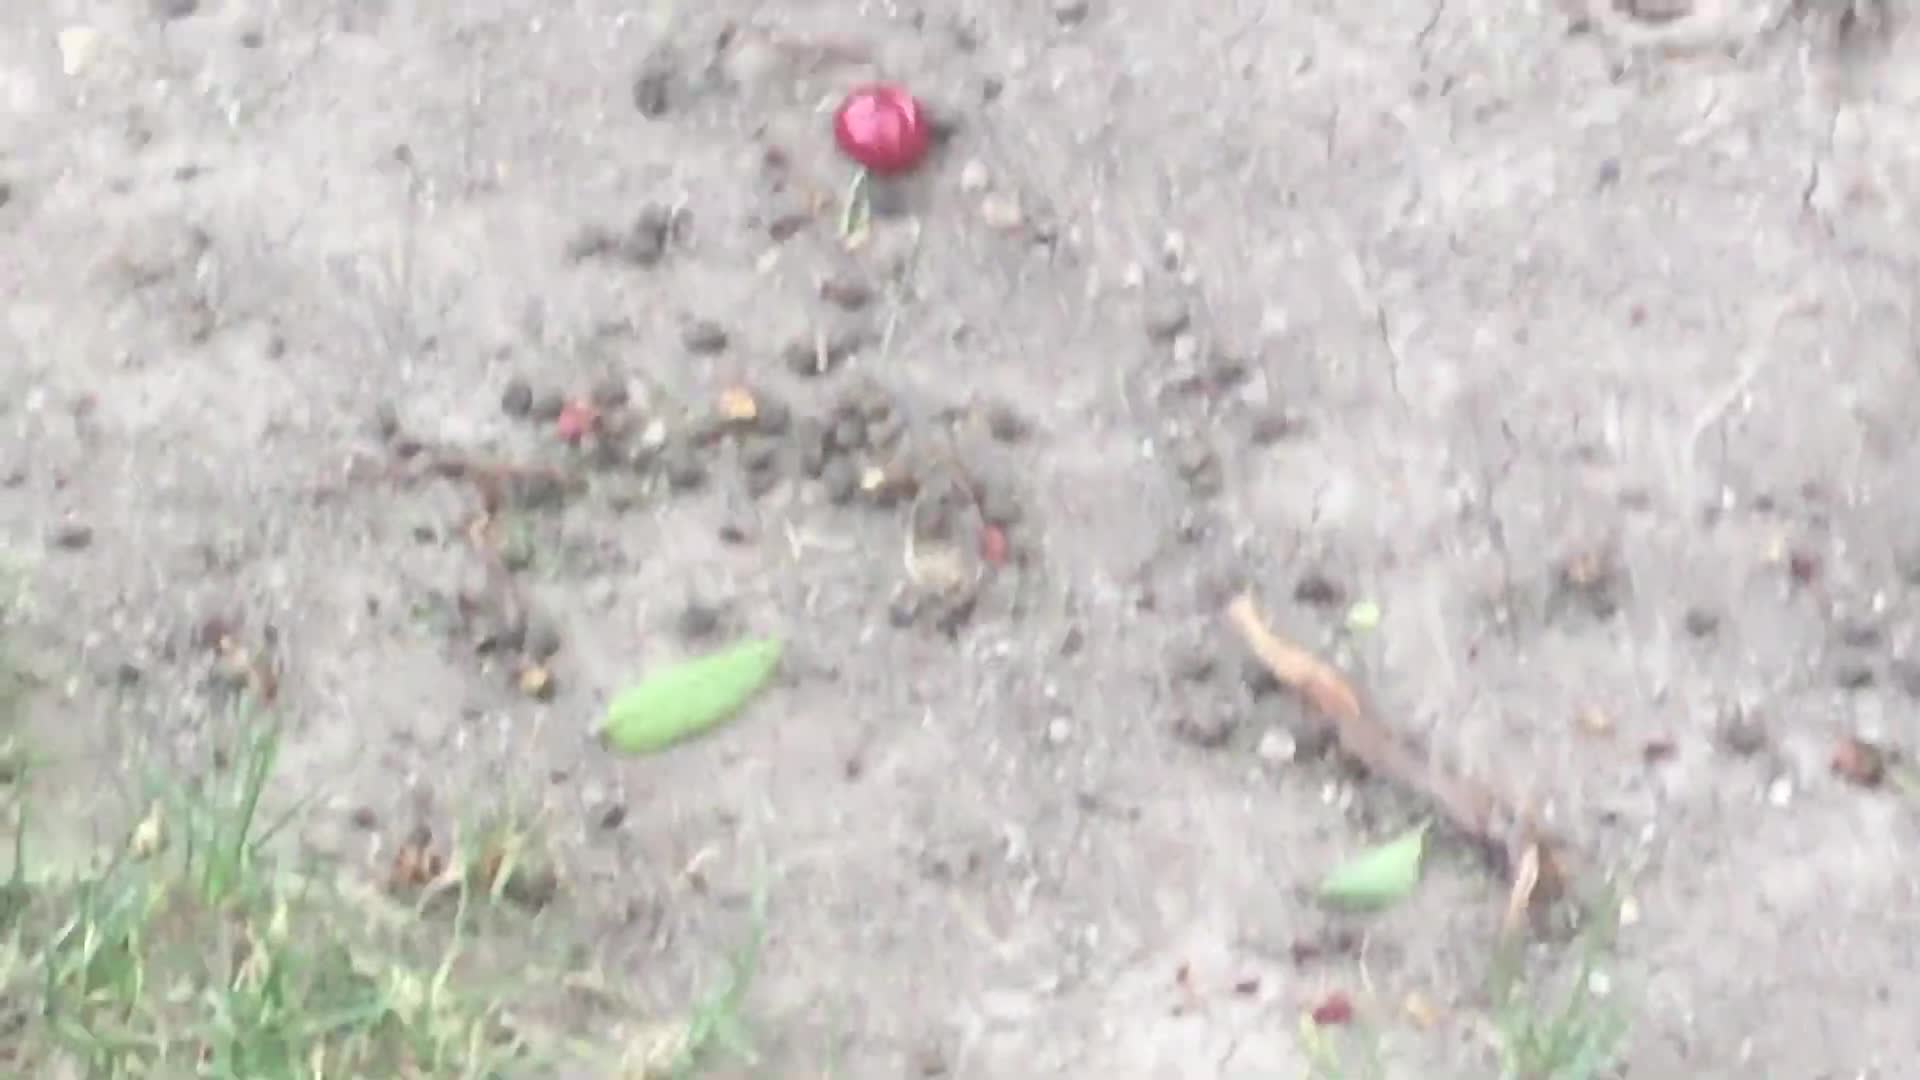 Cherries on the ground - Recorded on June 12, 2022, at 7:01PM MT